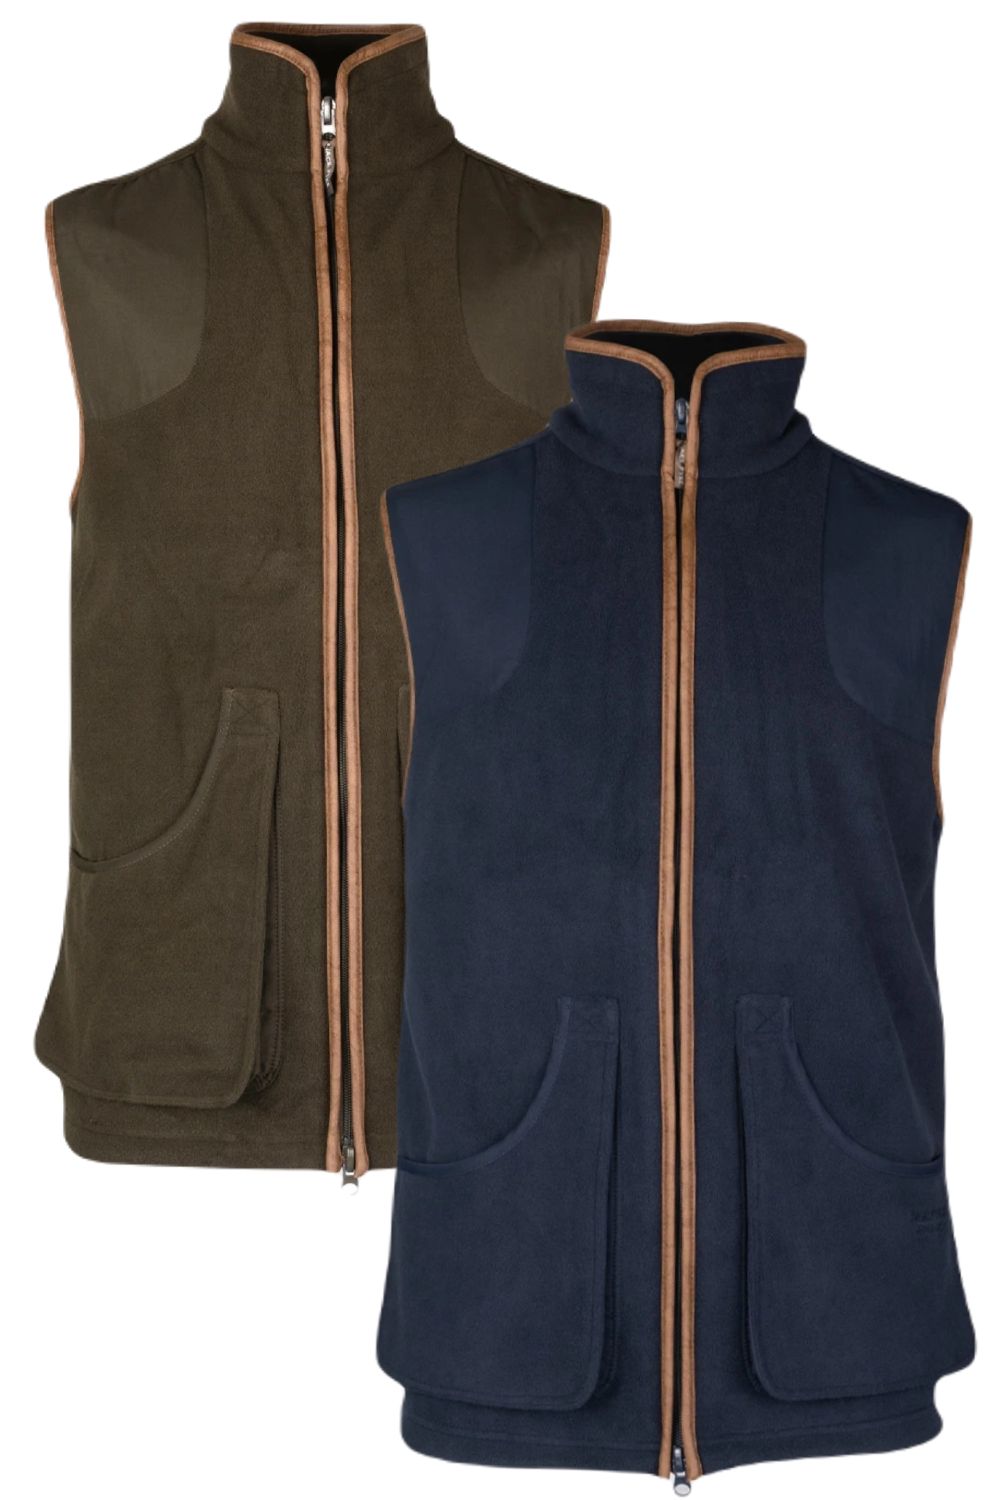 Jack Pyke Shooters Gilet In Dark Olive and Navy 